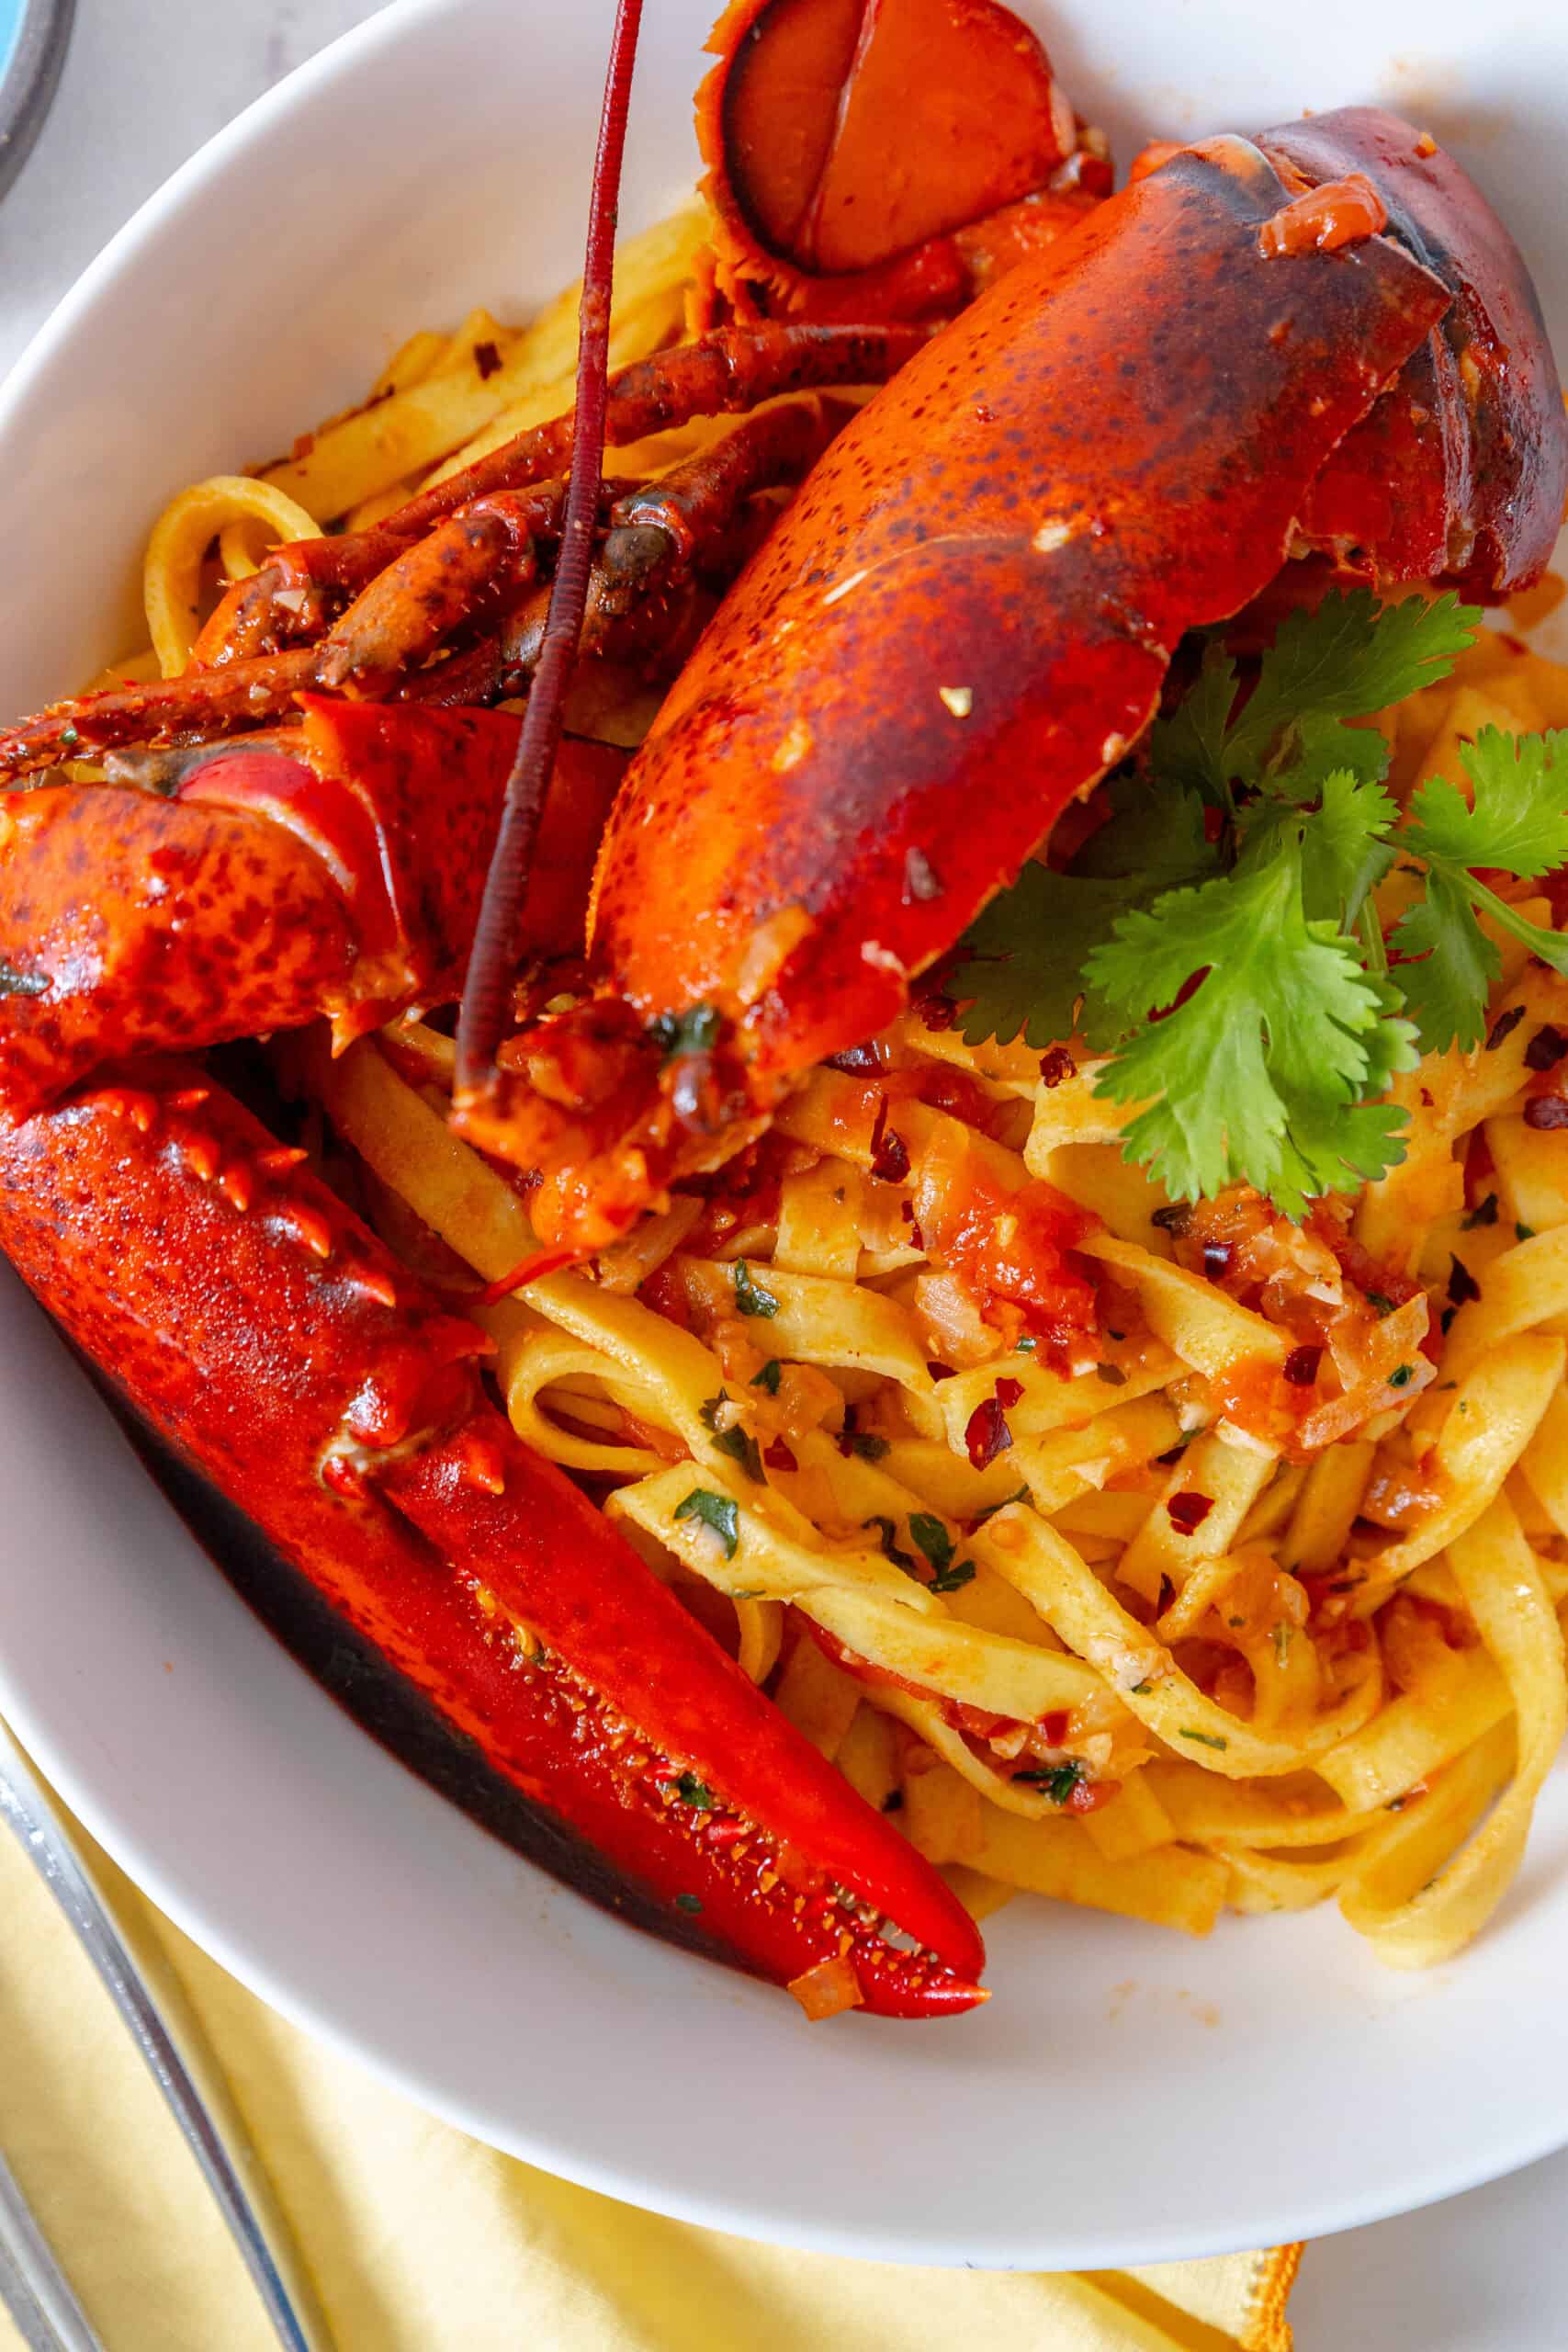 A delicious bowl of Busara Pasta, a Venetian specialty dish, made with succulent lobster.